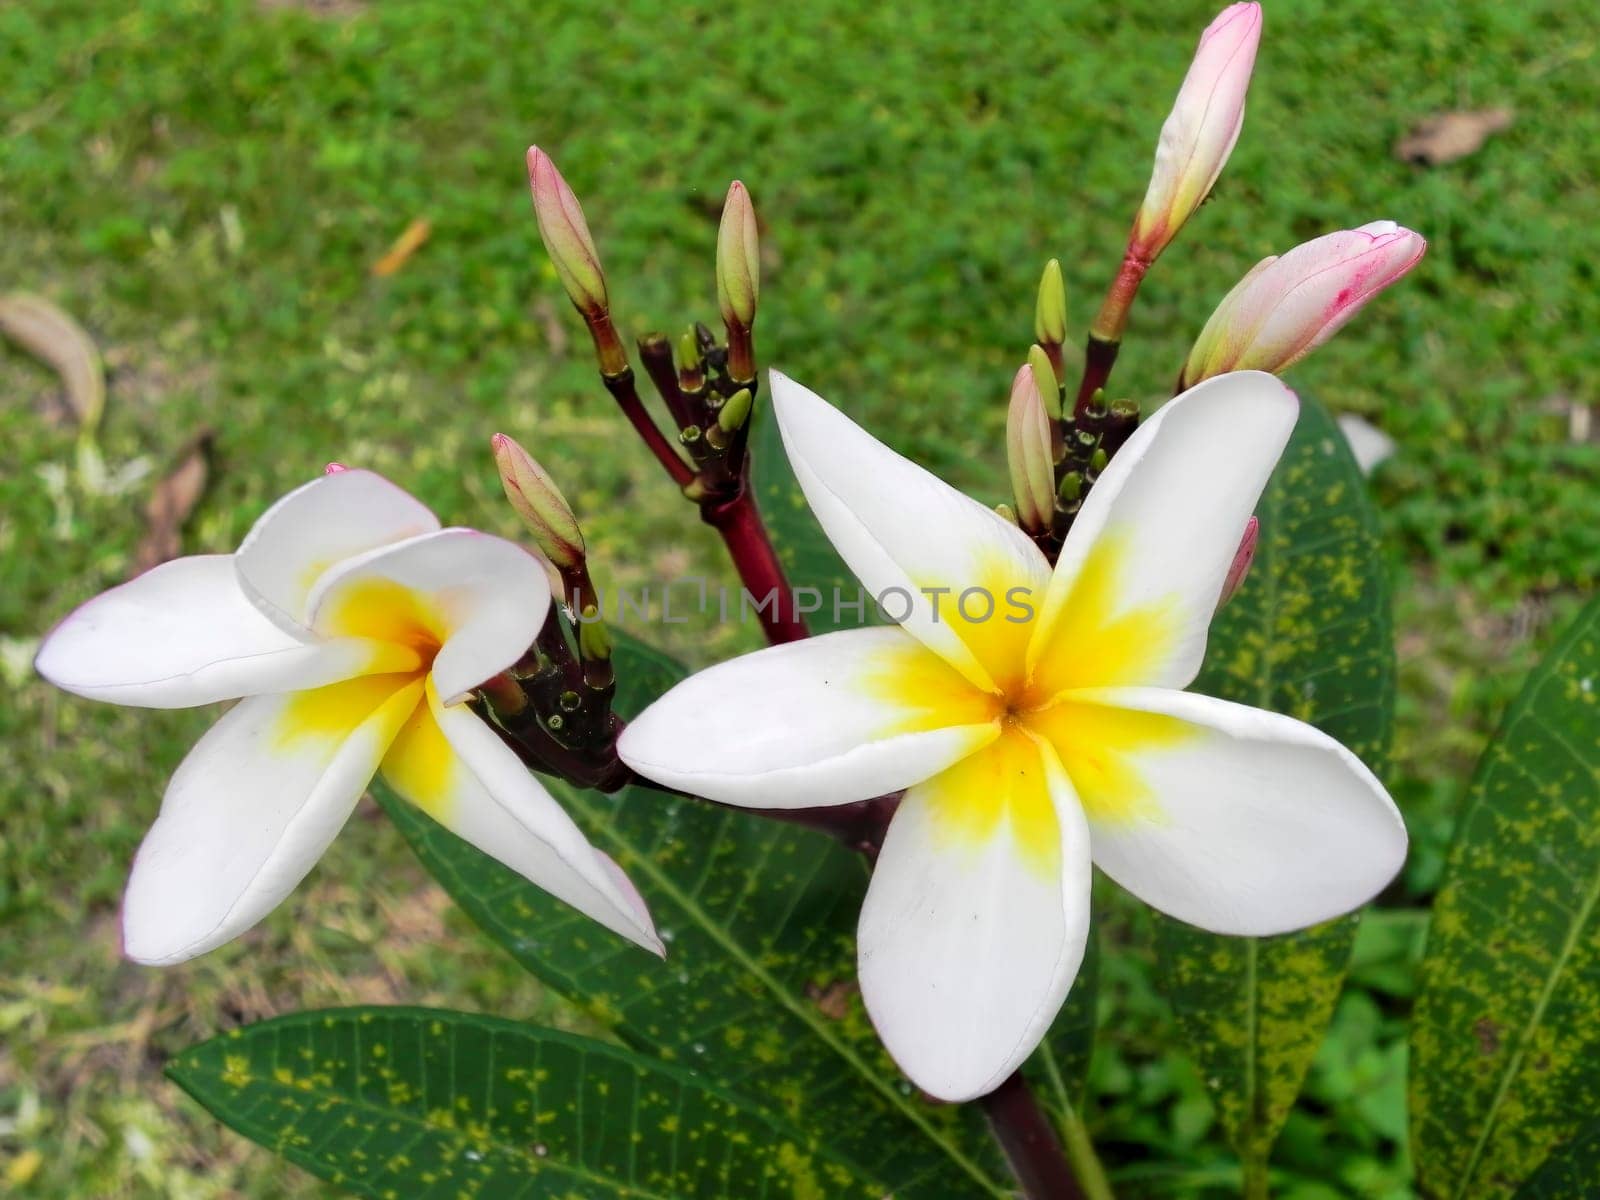 White and yellow plumeria flowers on a tree.